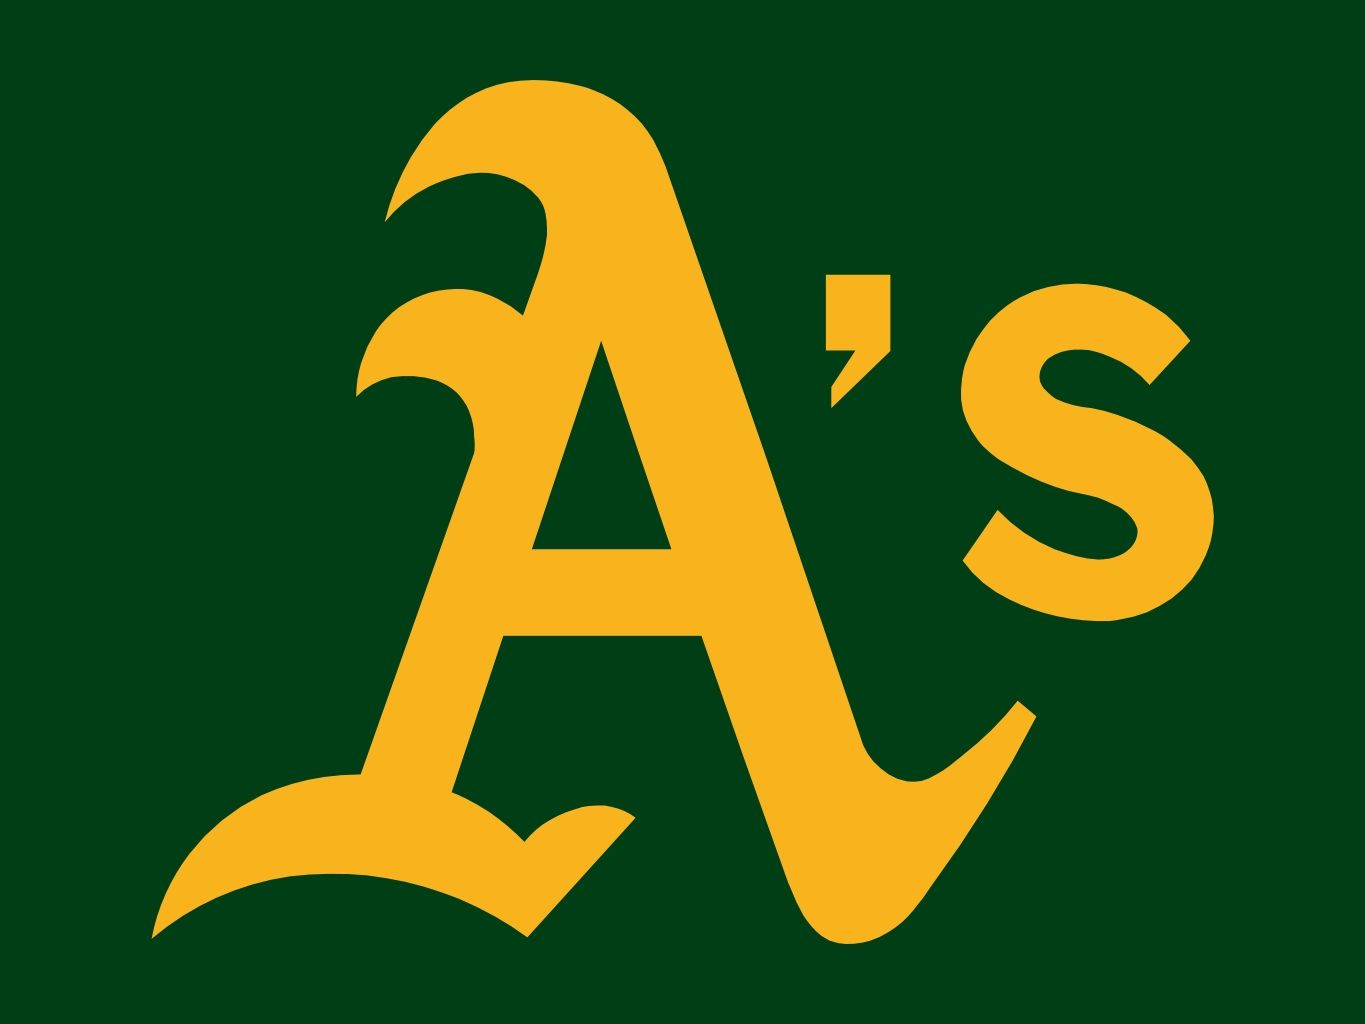 Oakland A's Themes